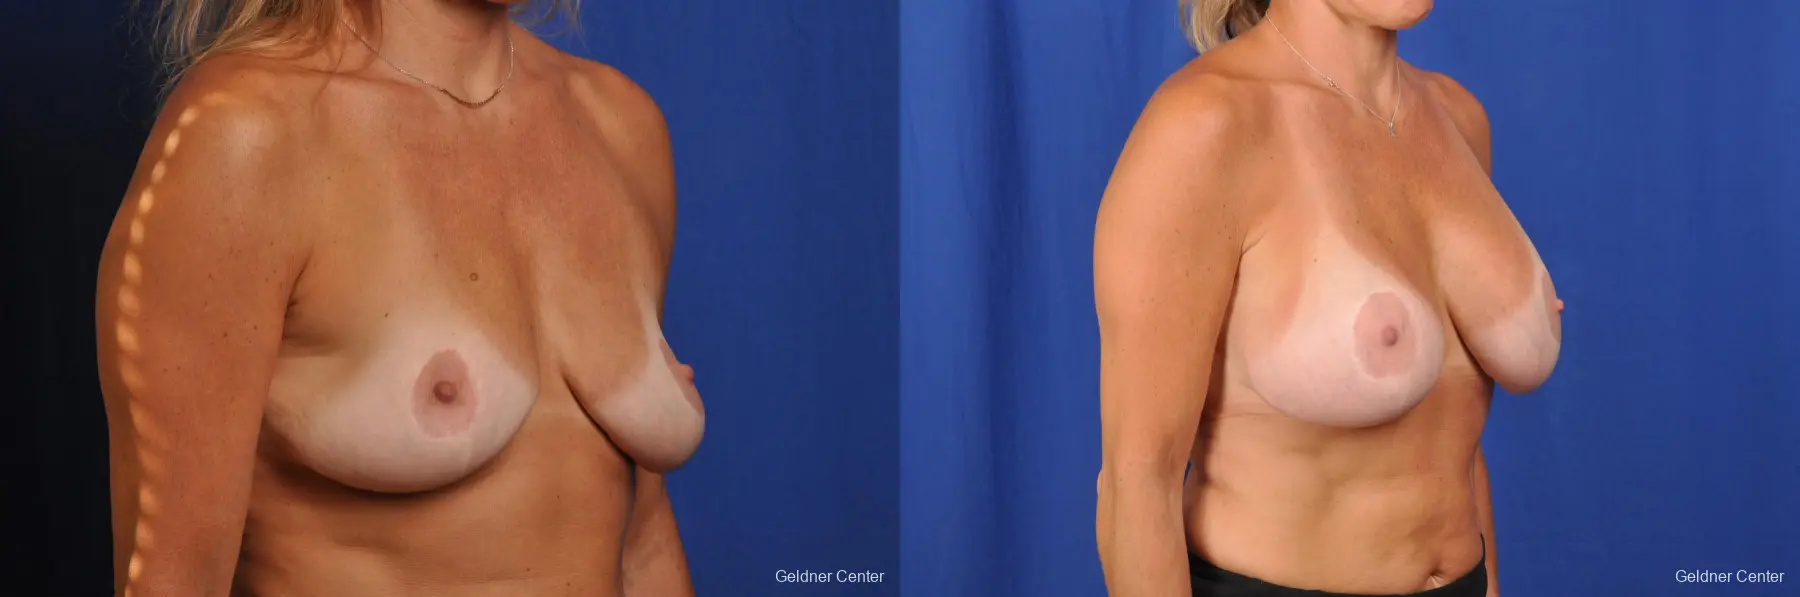 Breast Augmentation Hinsdale, Chicago 2391 - Before and After 3